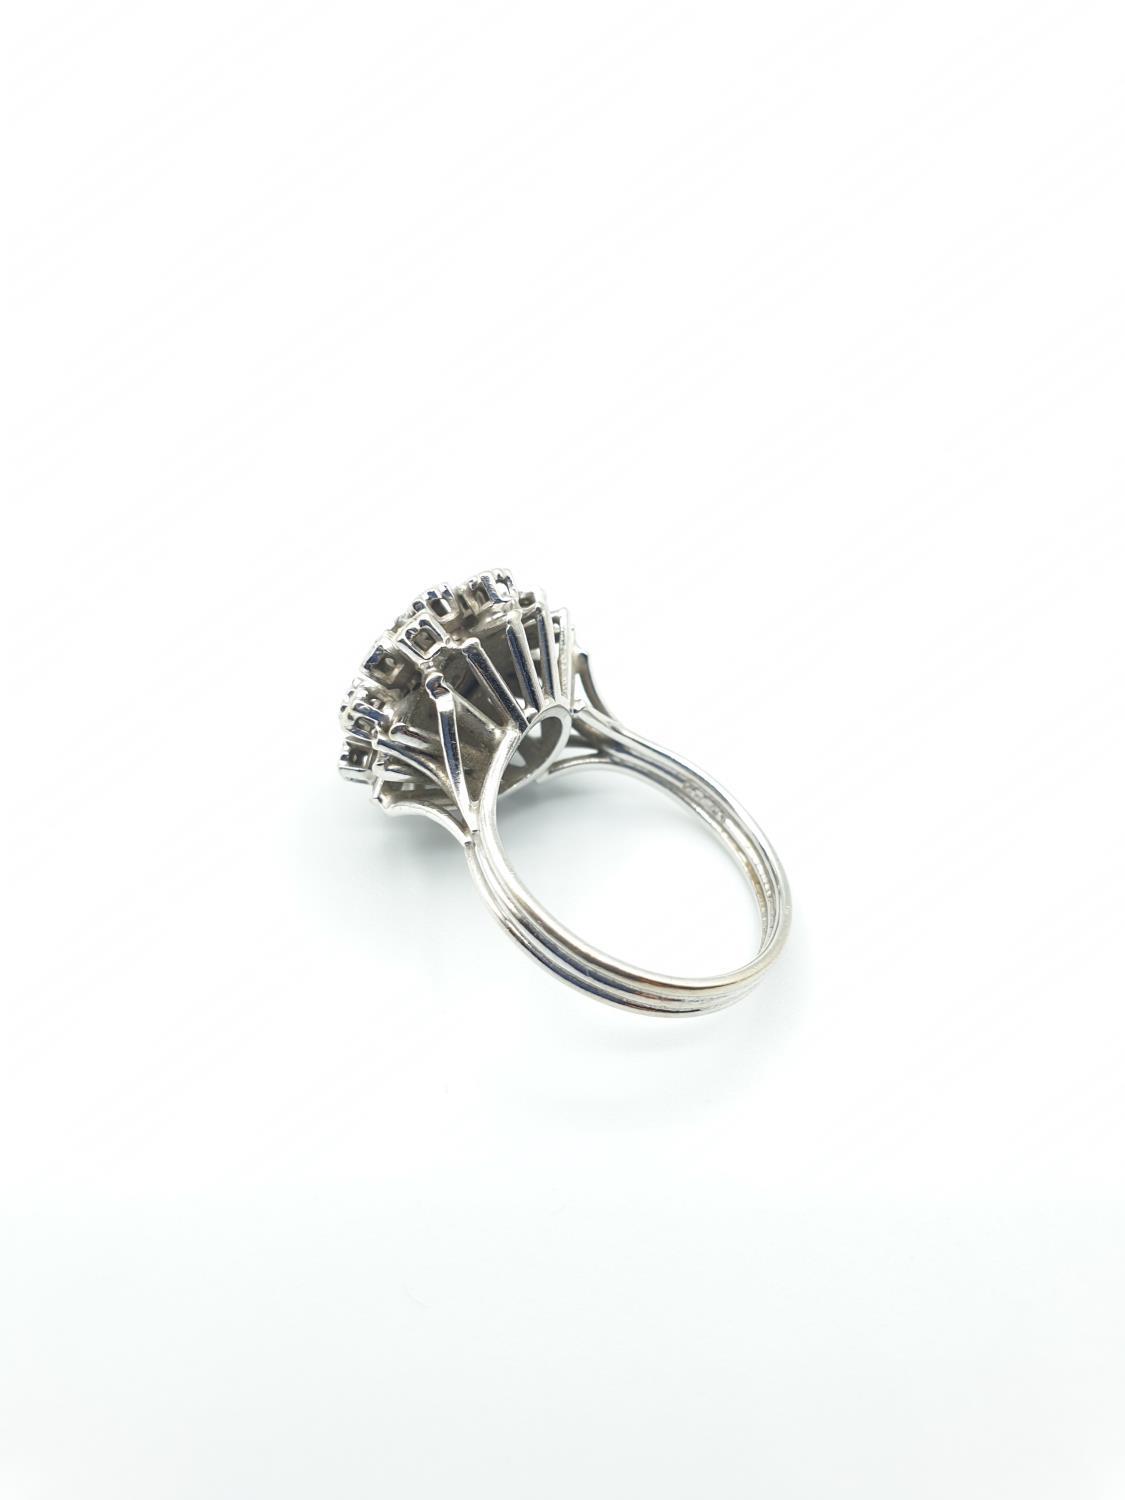 18CT WHITE GOLD DIAMOND CLUSTER RING, SIZE M WEIGHT 6.2G. Hallmark inside the band showing 750 for - Image 6 of 6